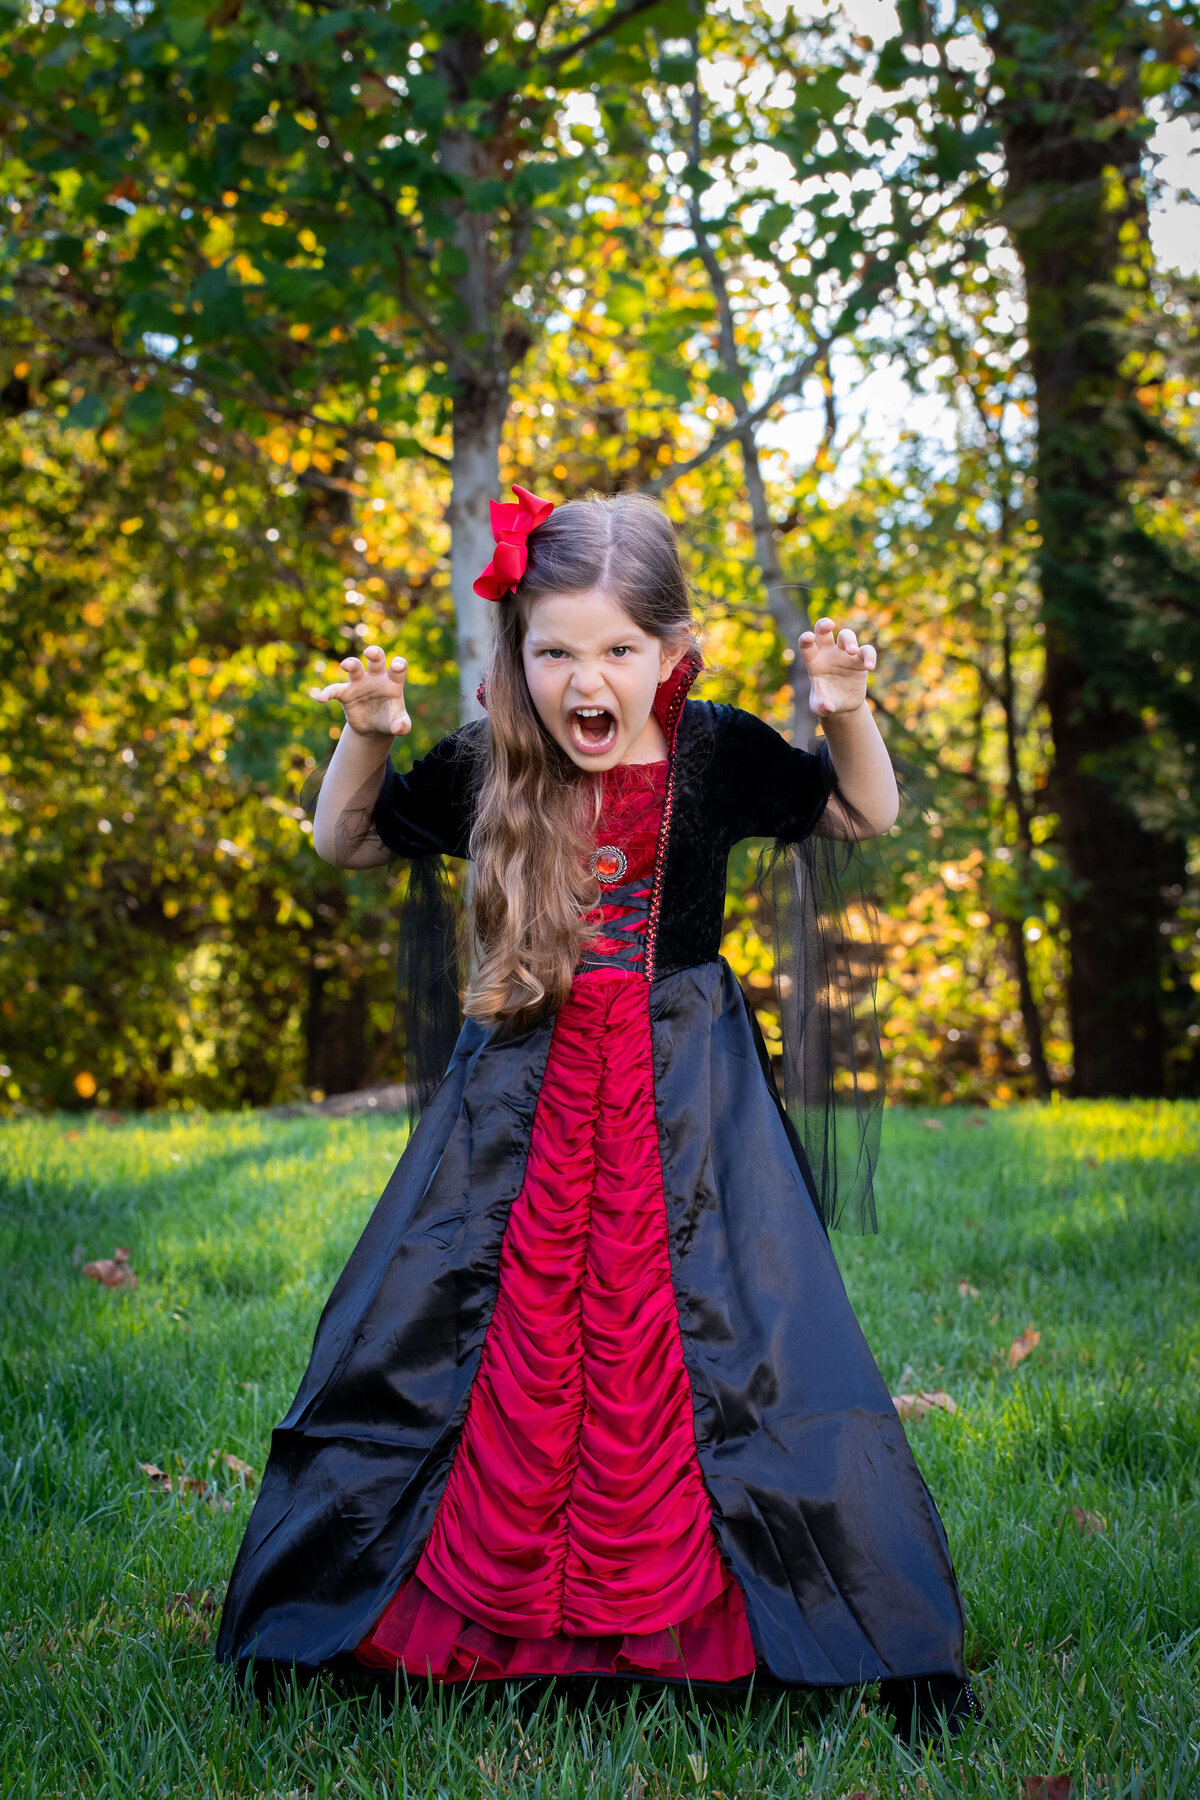 My daughter dressed up as a vampire for Halloween, posing in the woods.